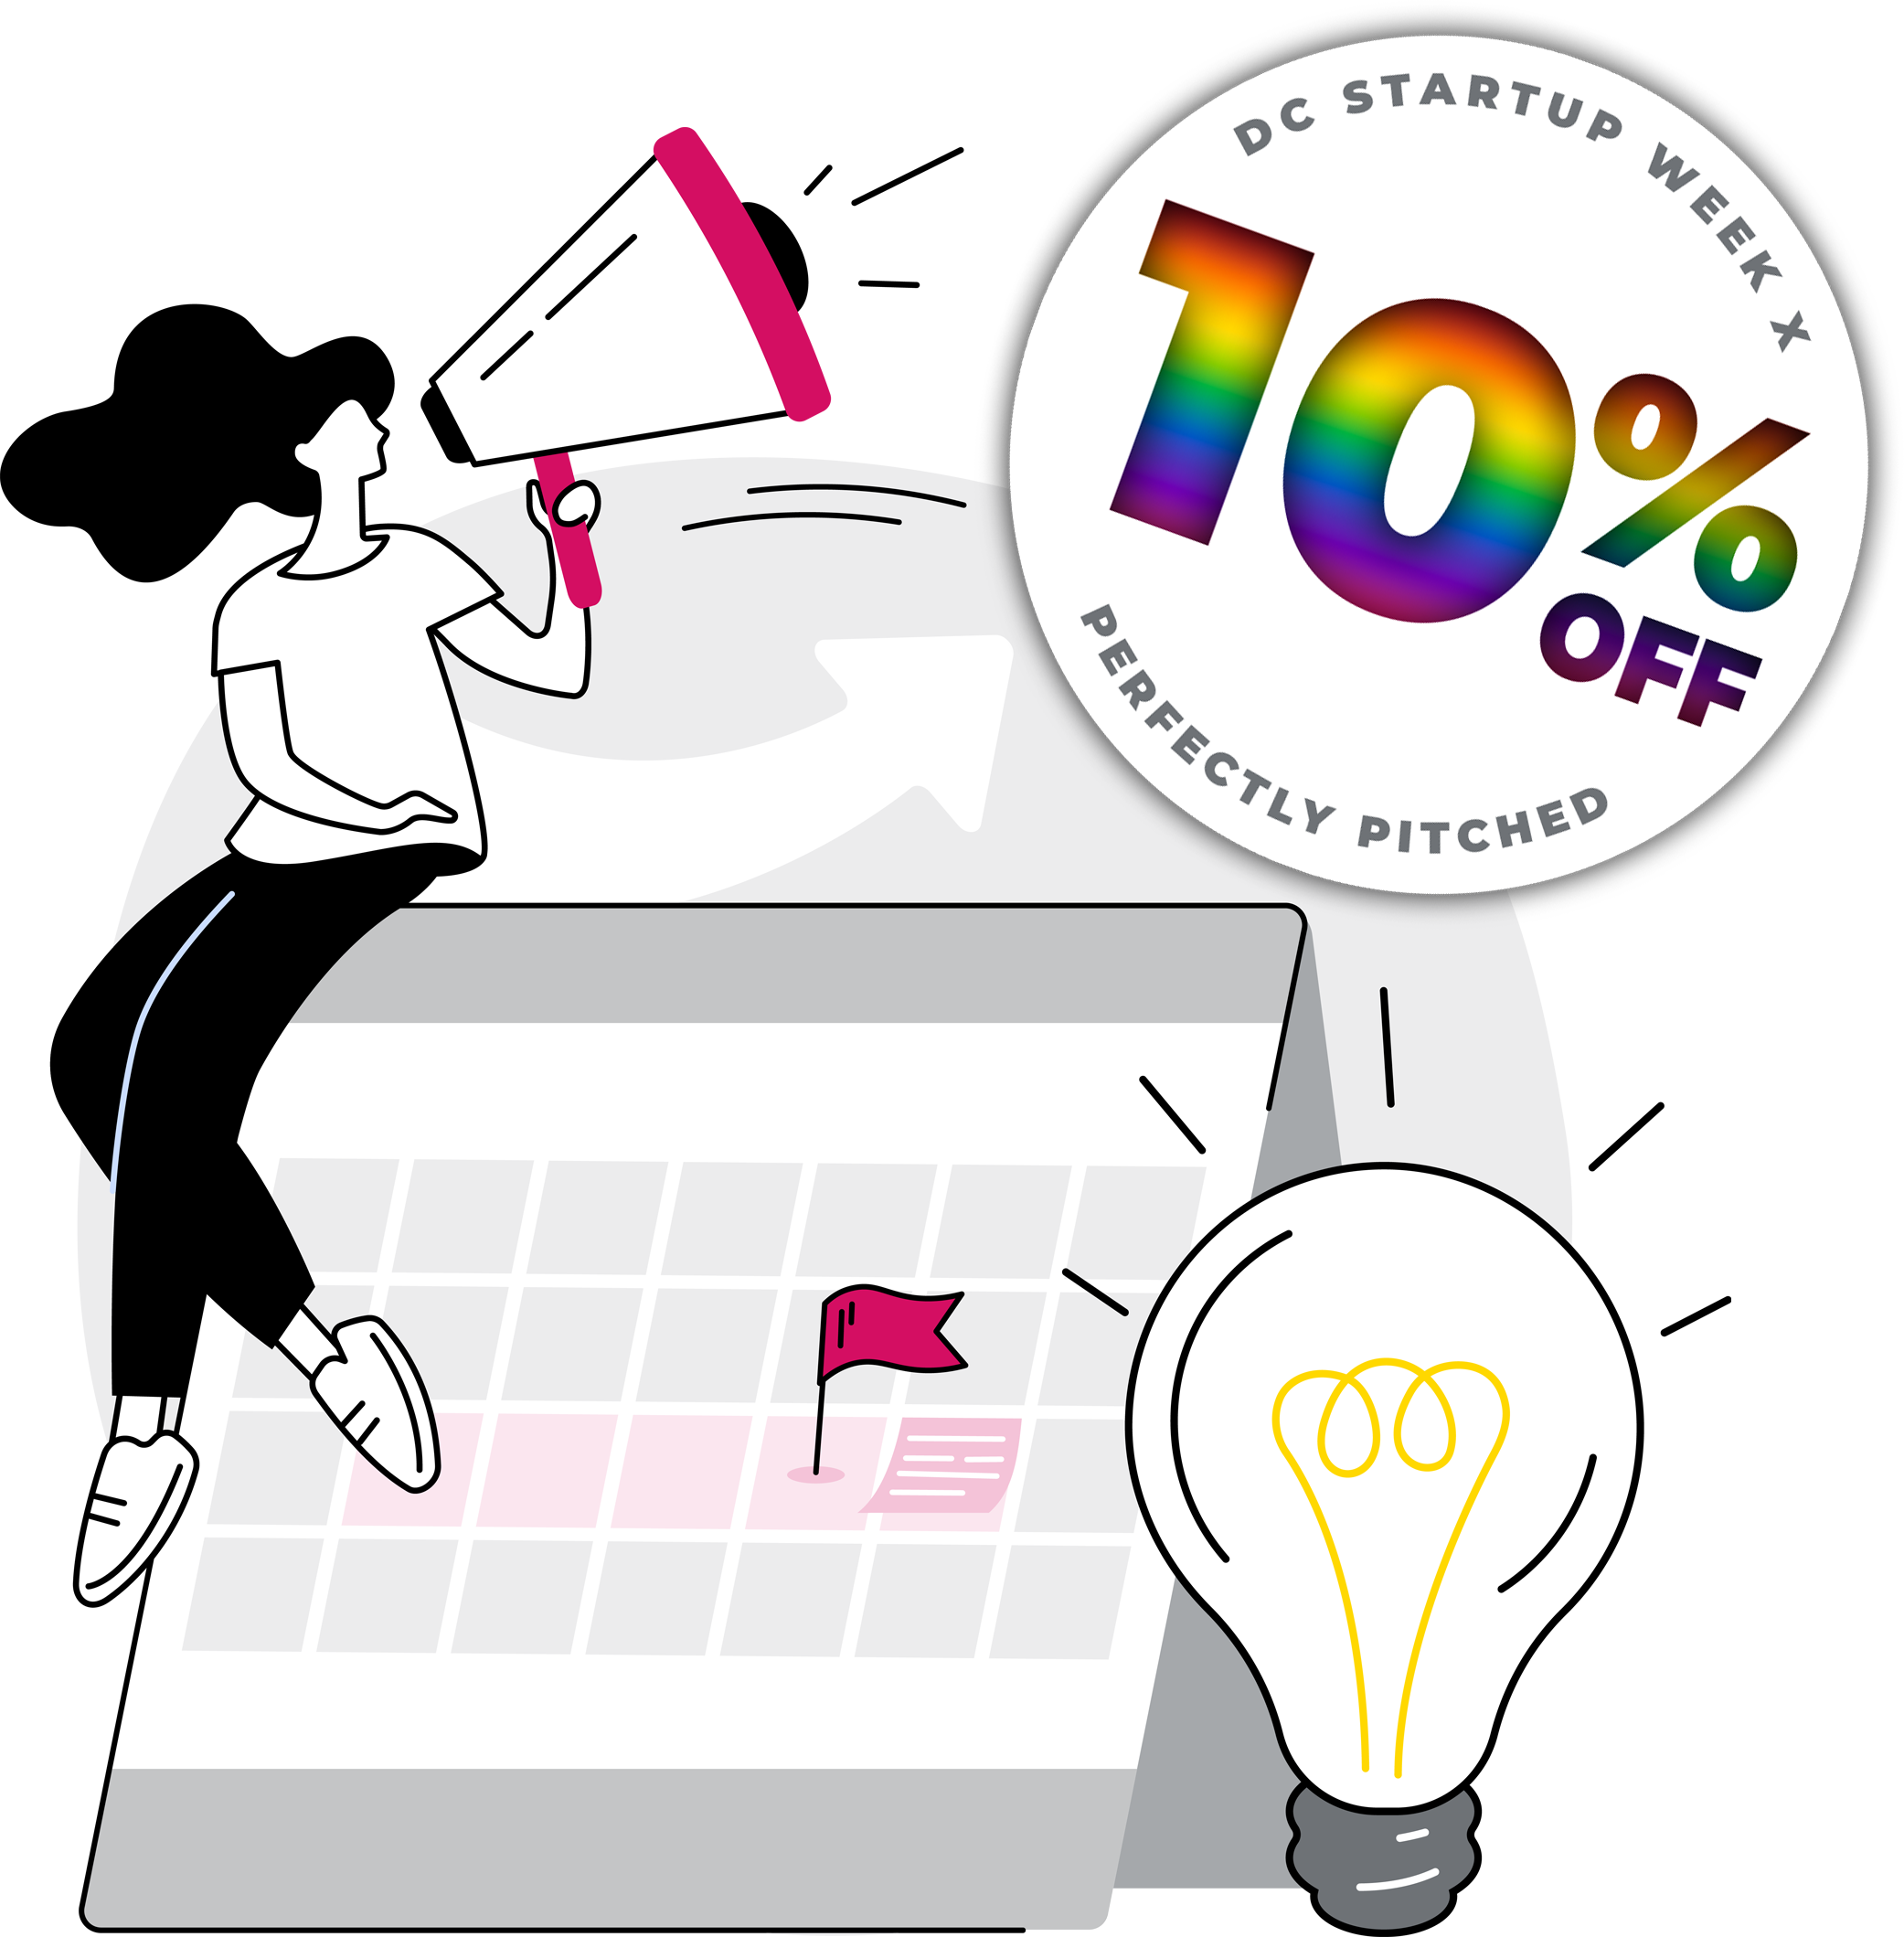 A decorative illustration highlighting Perfectly Pitched's 10% Discount for DC Startup Week attendees. Click to learn more. The illustration is in a modern, crisp, clean graphic style, showing a woman seated on top of a propped up tent-style calendar. The woman is holding a pink, black, and white megaphone. The calendar shows the dates of DC Startup Week highlighted in pale pink, with a pink flag on the 15th to highlight our Keynote event, and a post-it style note on the 16th highlighting the pitch competition. There's also a cute oversized lightbulb.